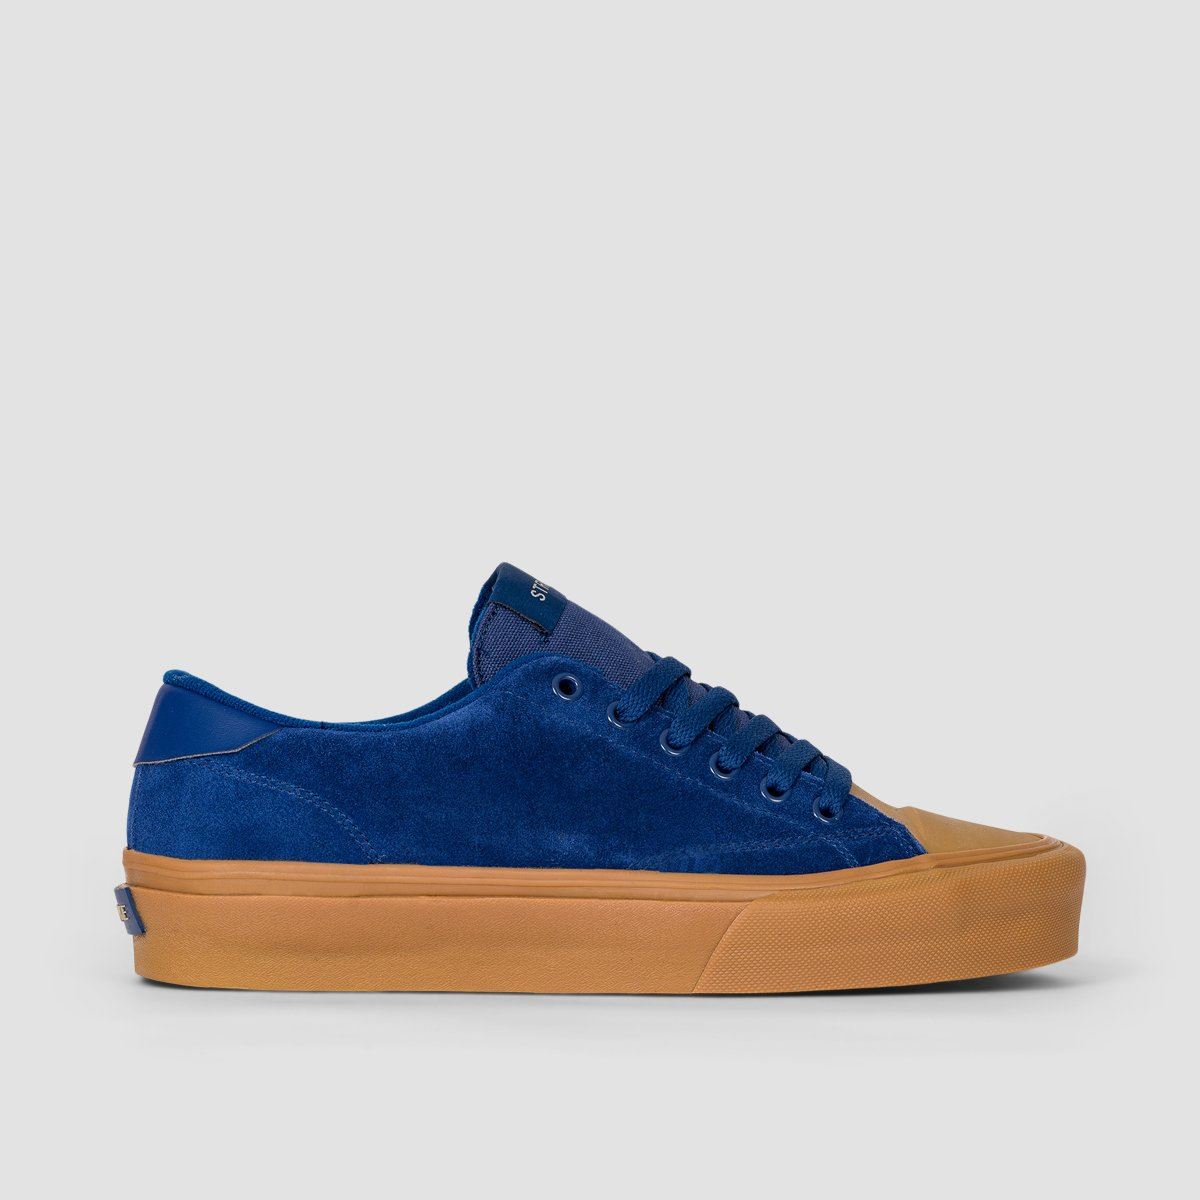 STRAYE Stanley Shoes - Navy Gum Suede